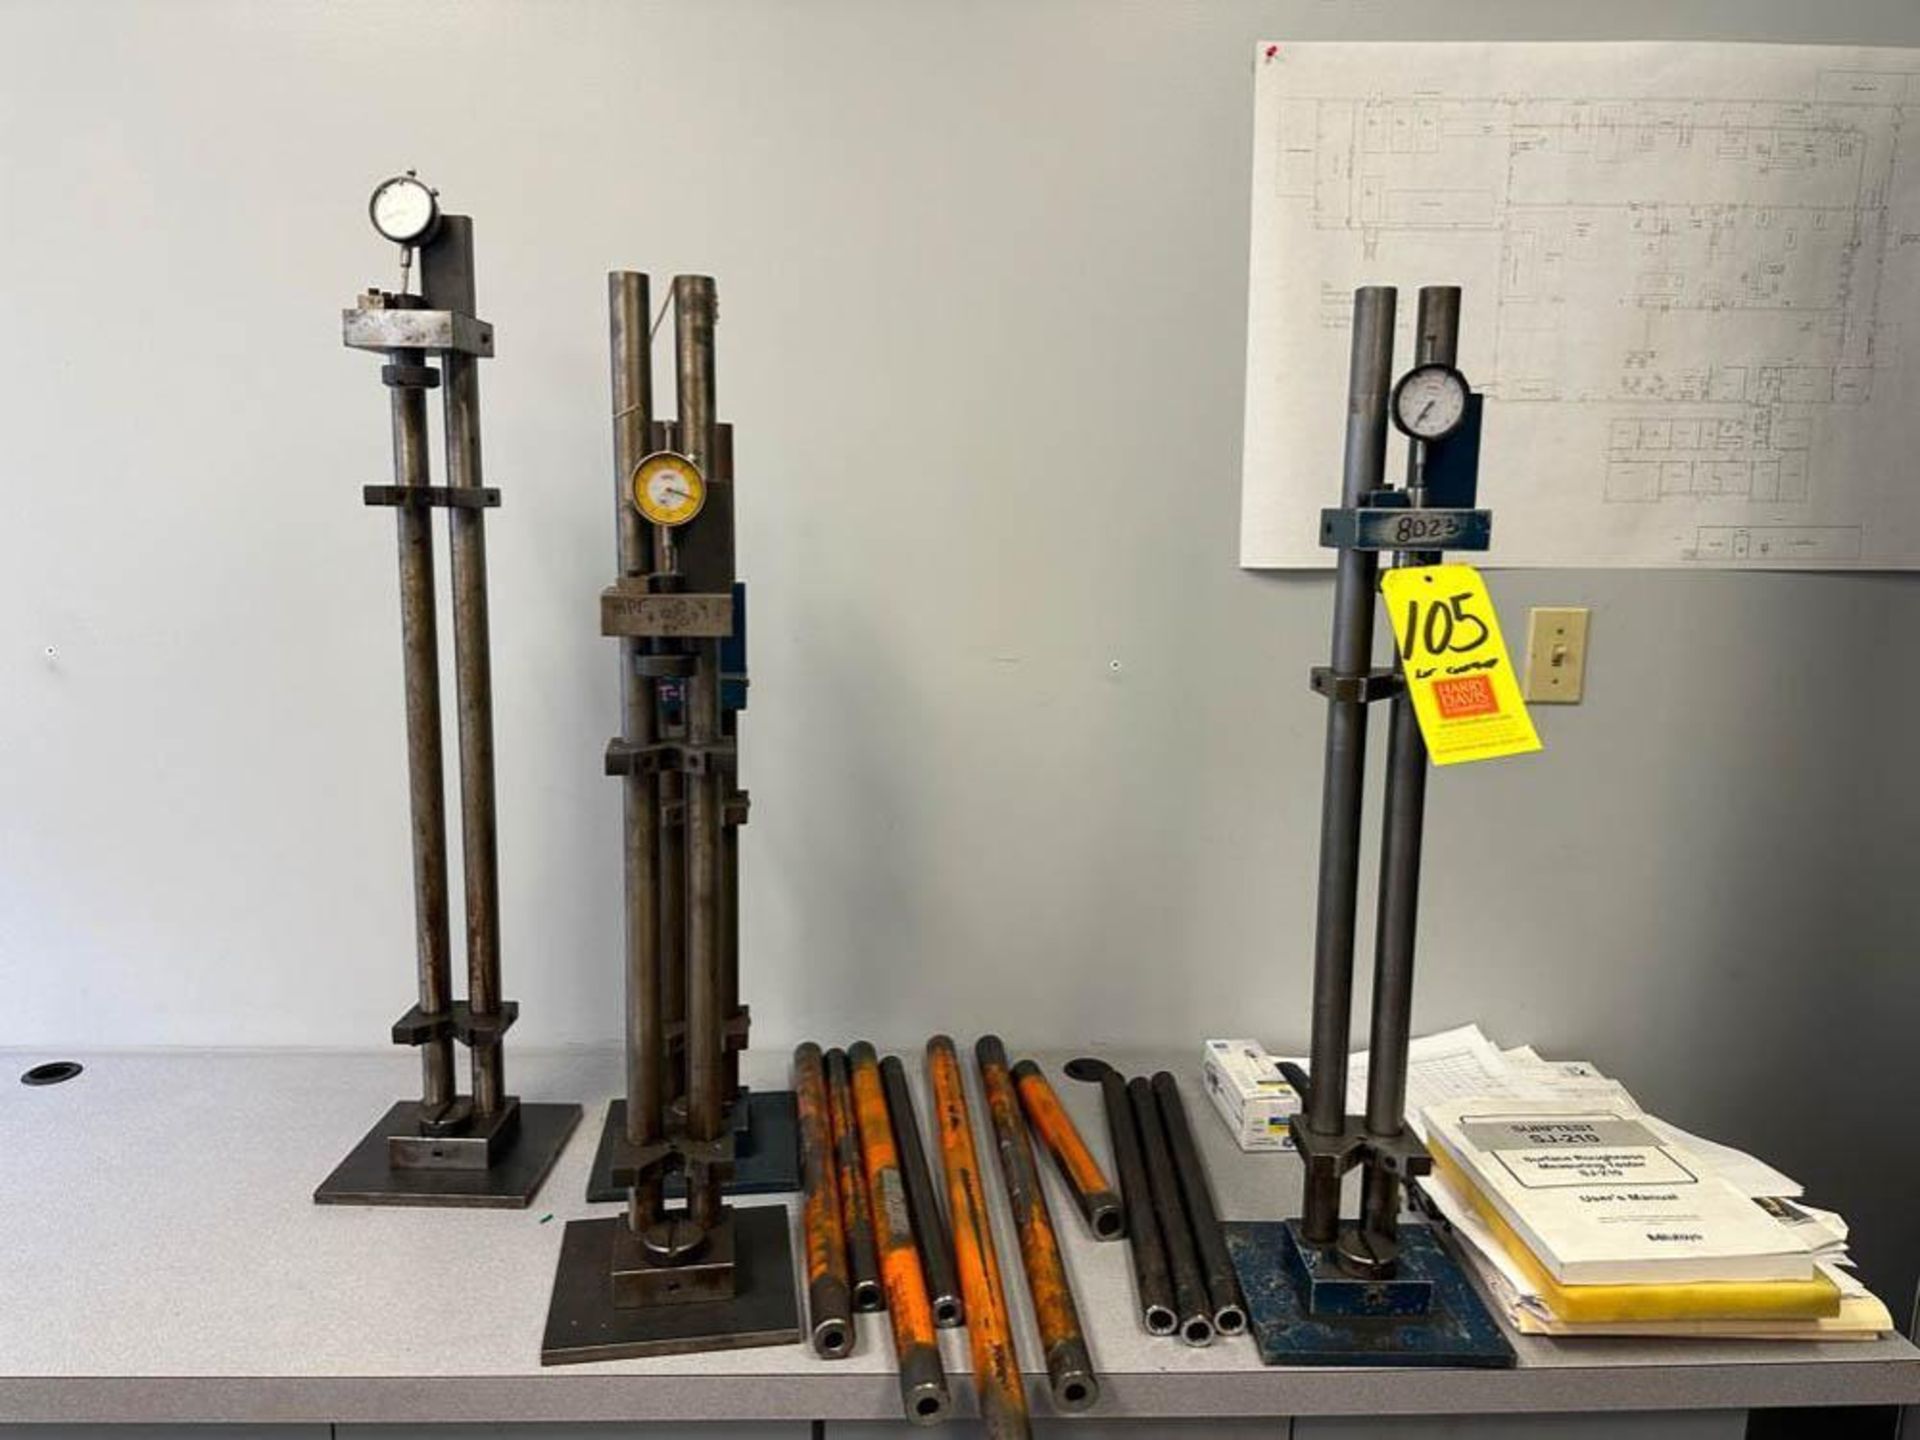 (4) Assorted Height Gauges, Piping, Etch-O-Matic, Micrometers, Paper Cutter, Desks, Filing Cabinets